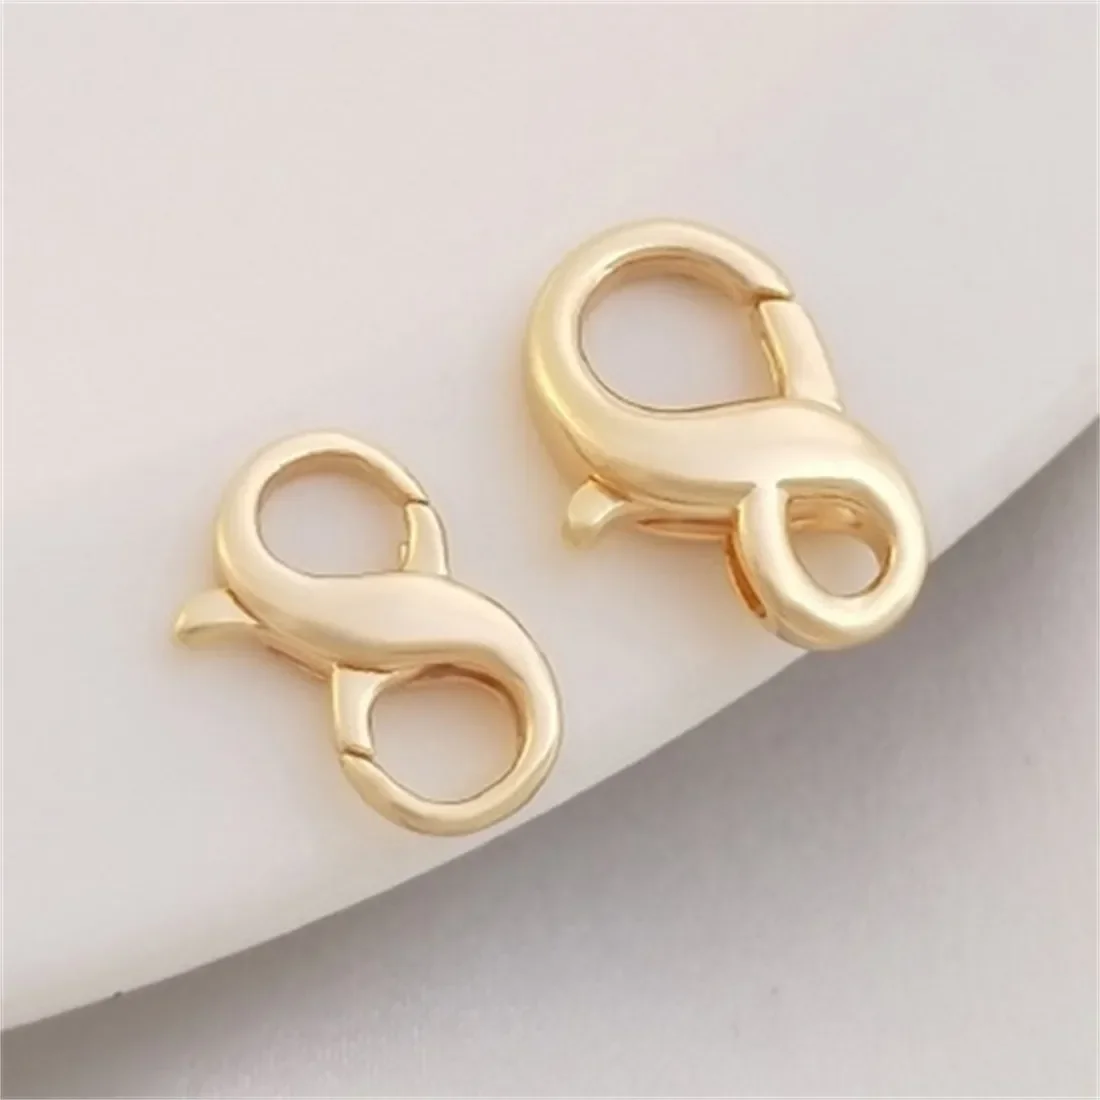 

Korean-made Spring Buckle 14K Gold-plated 8-shaped Lobster Buckle Diy Bracelet Necklace Connected with Finishing Buckle Jewelry